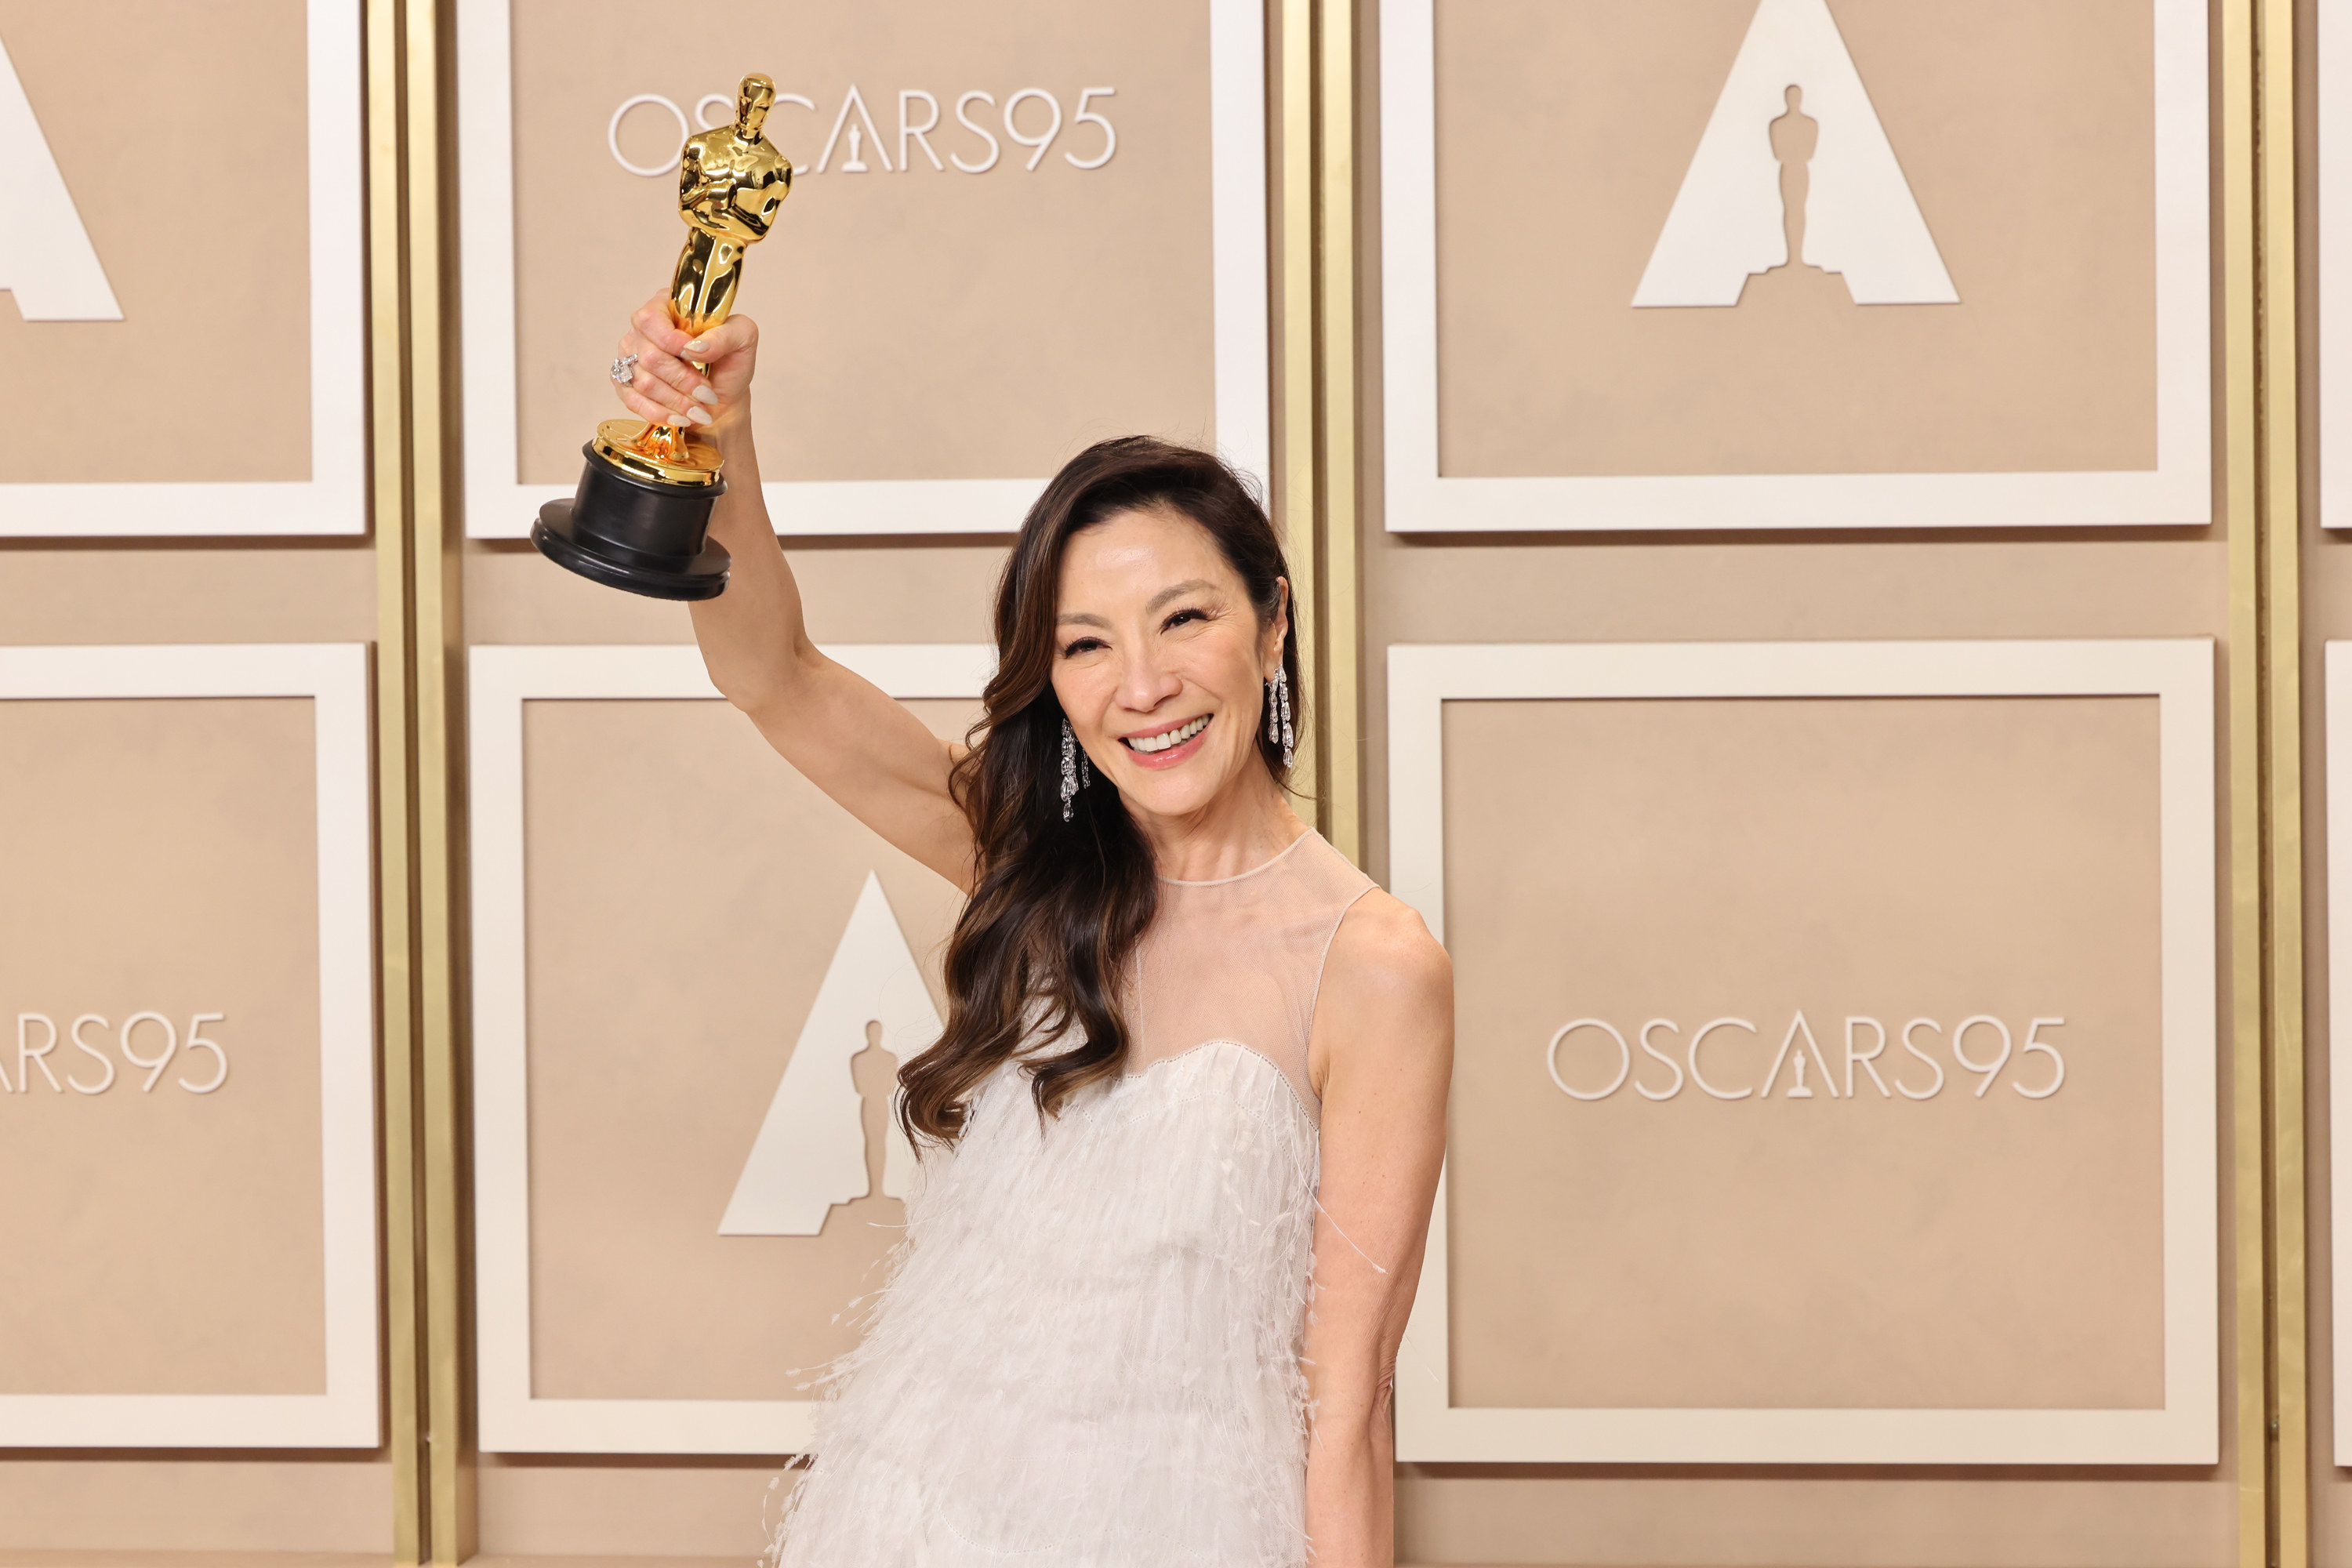 Michelle holding up her Oscar